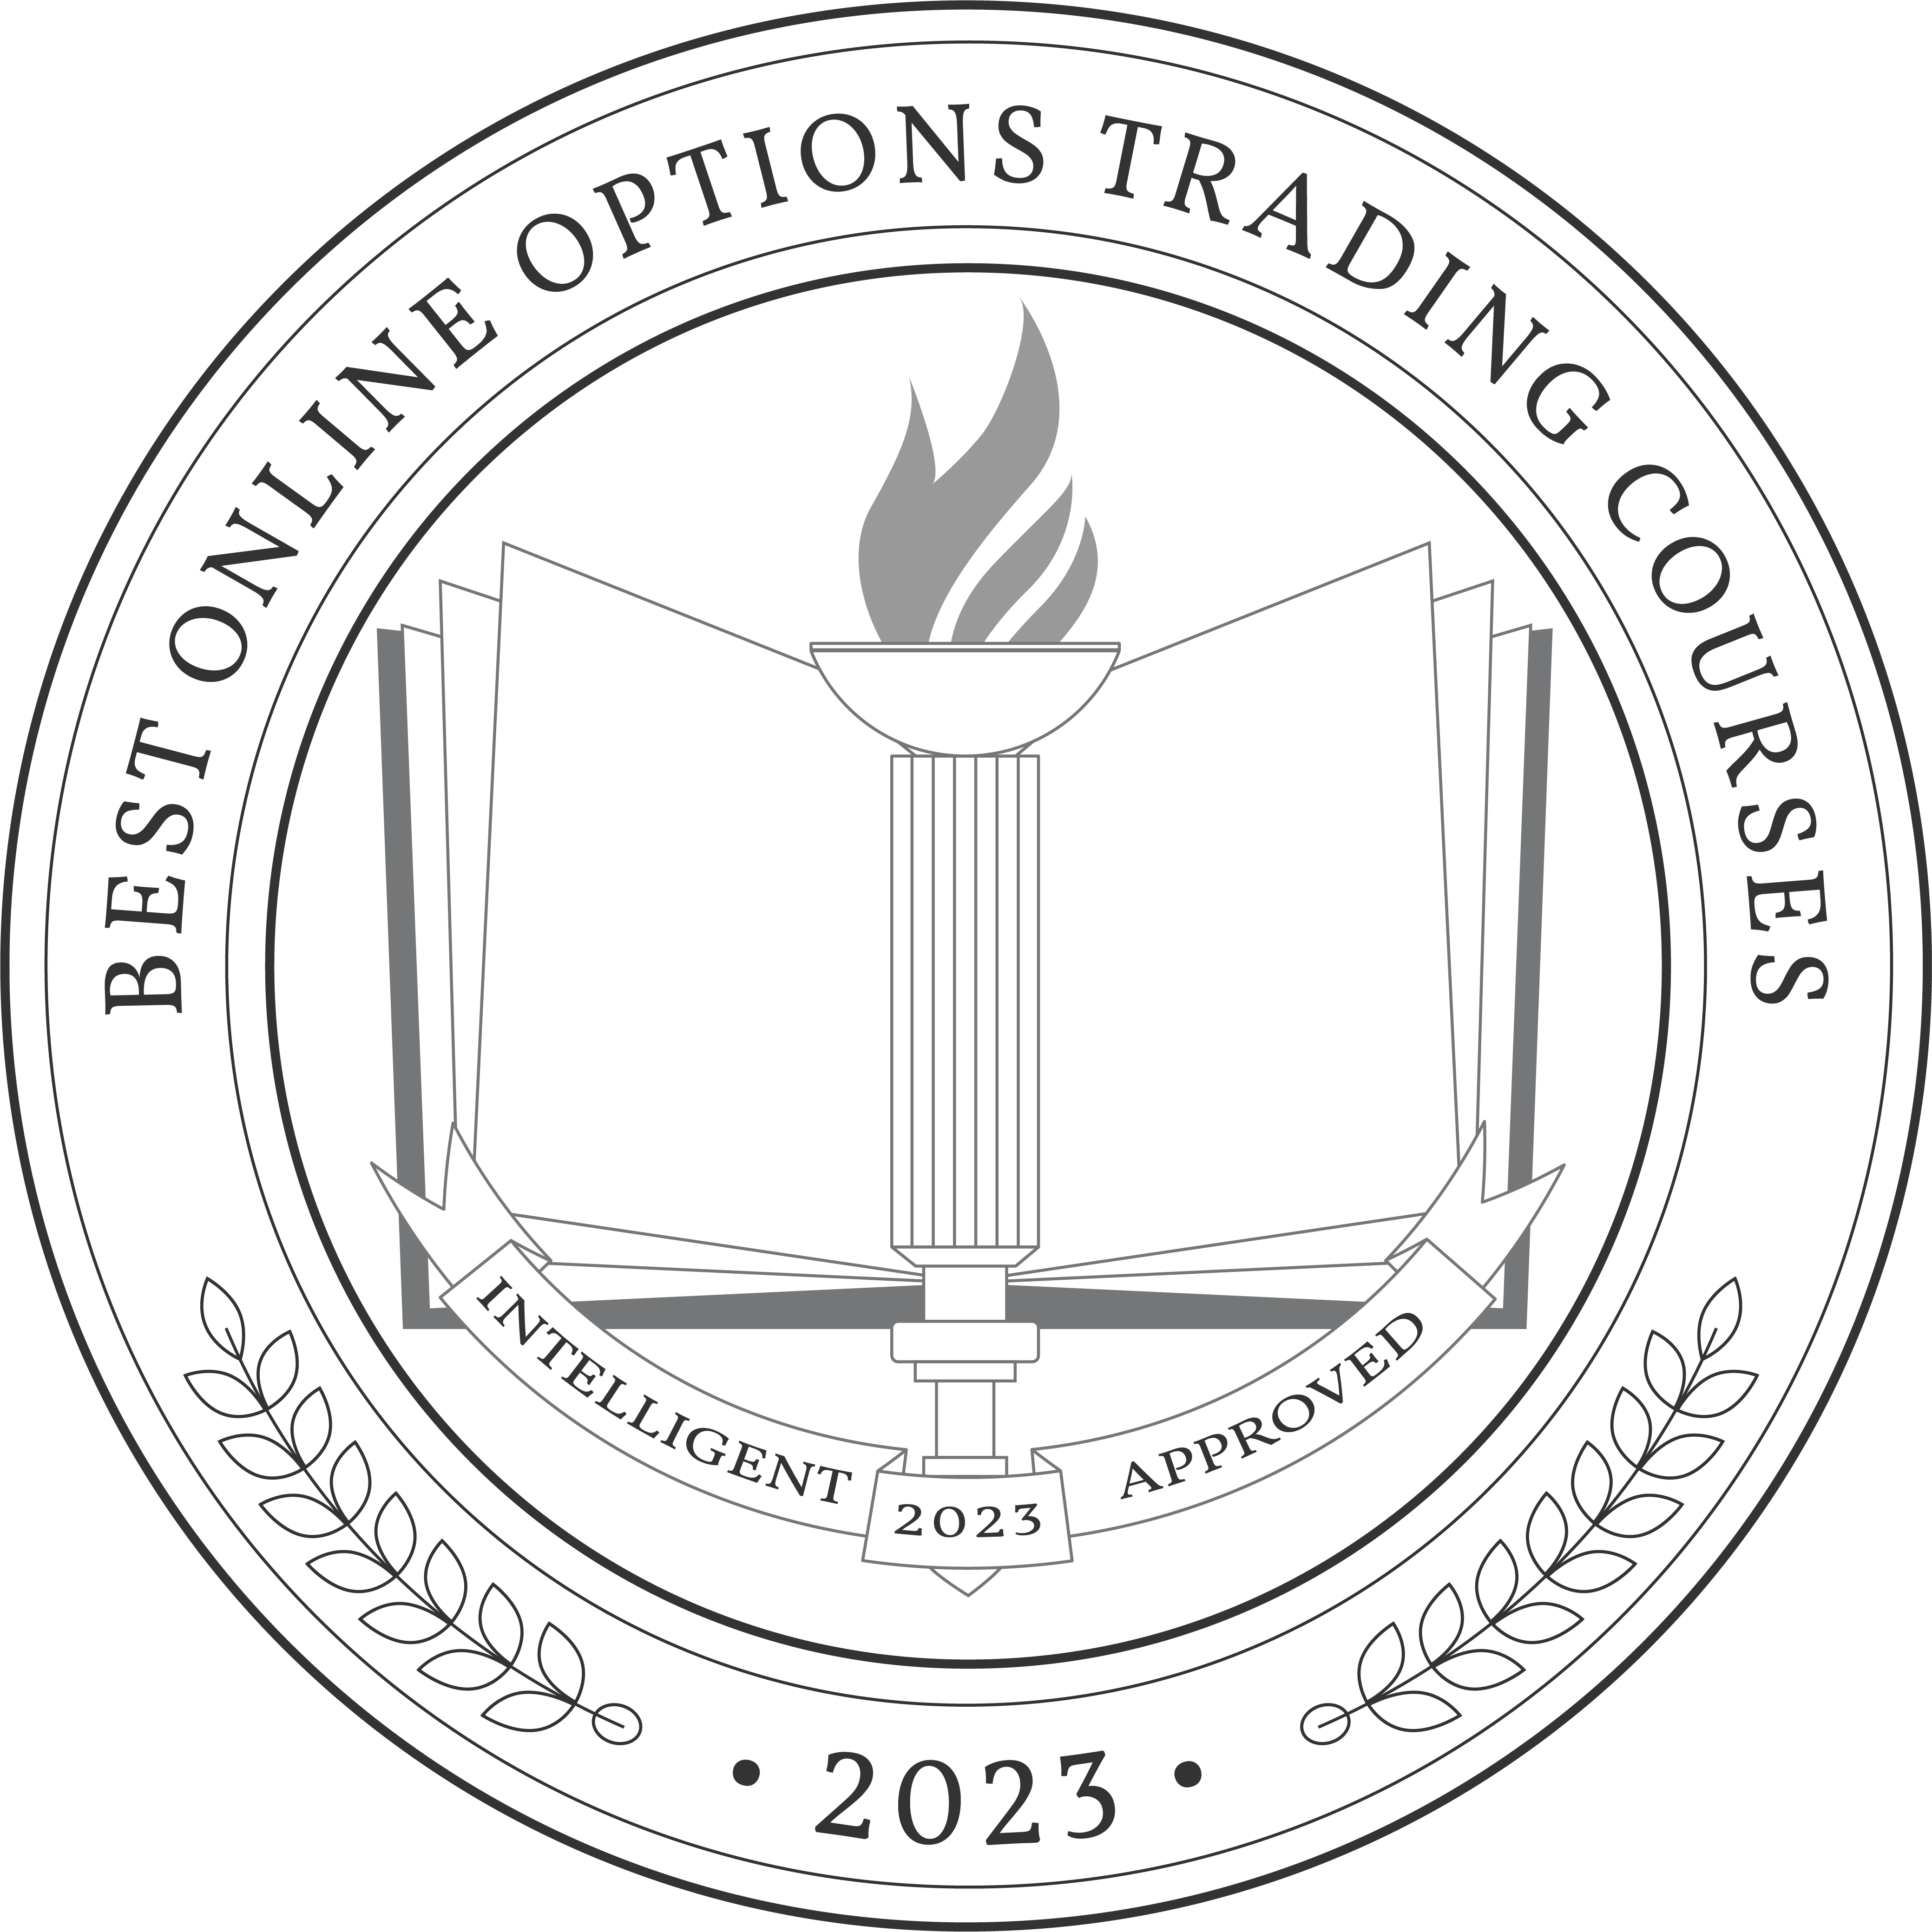 The 10 Best Online Options Trading Courses of 2023 - Intelligent